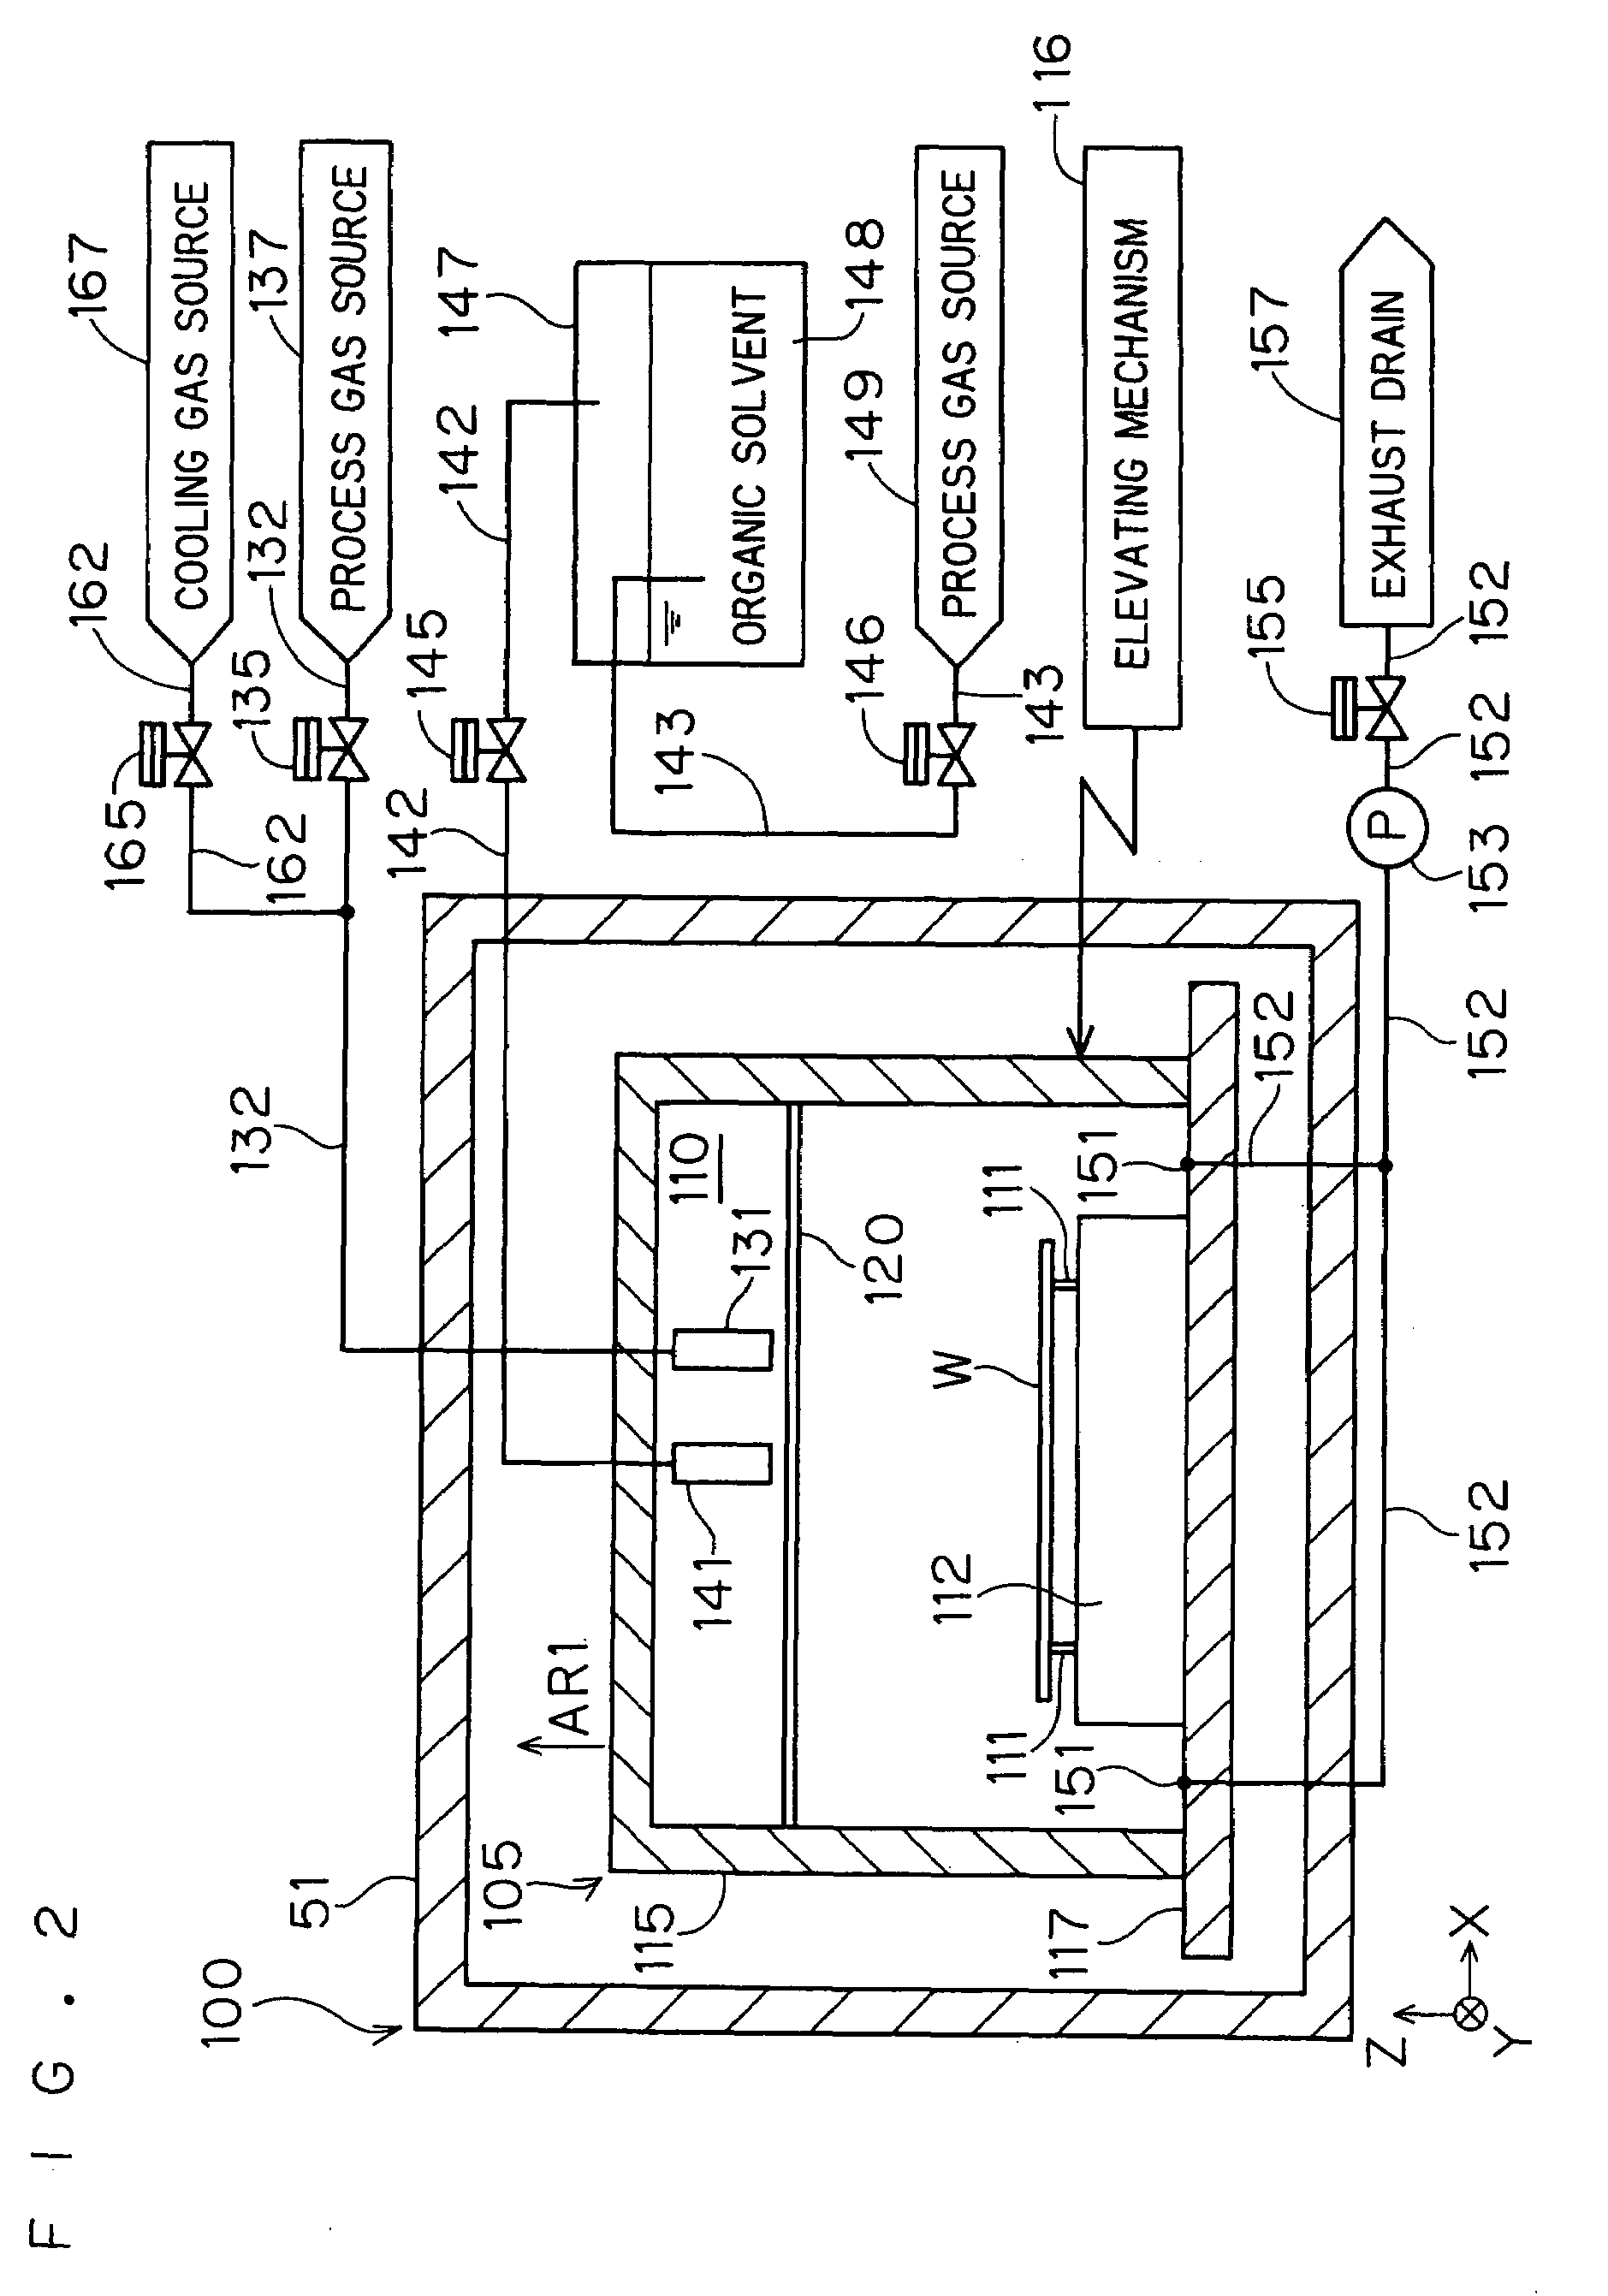 Substrate processing apparatus for drying substrate